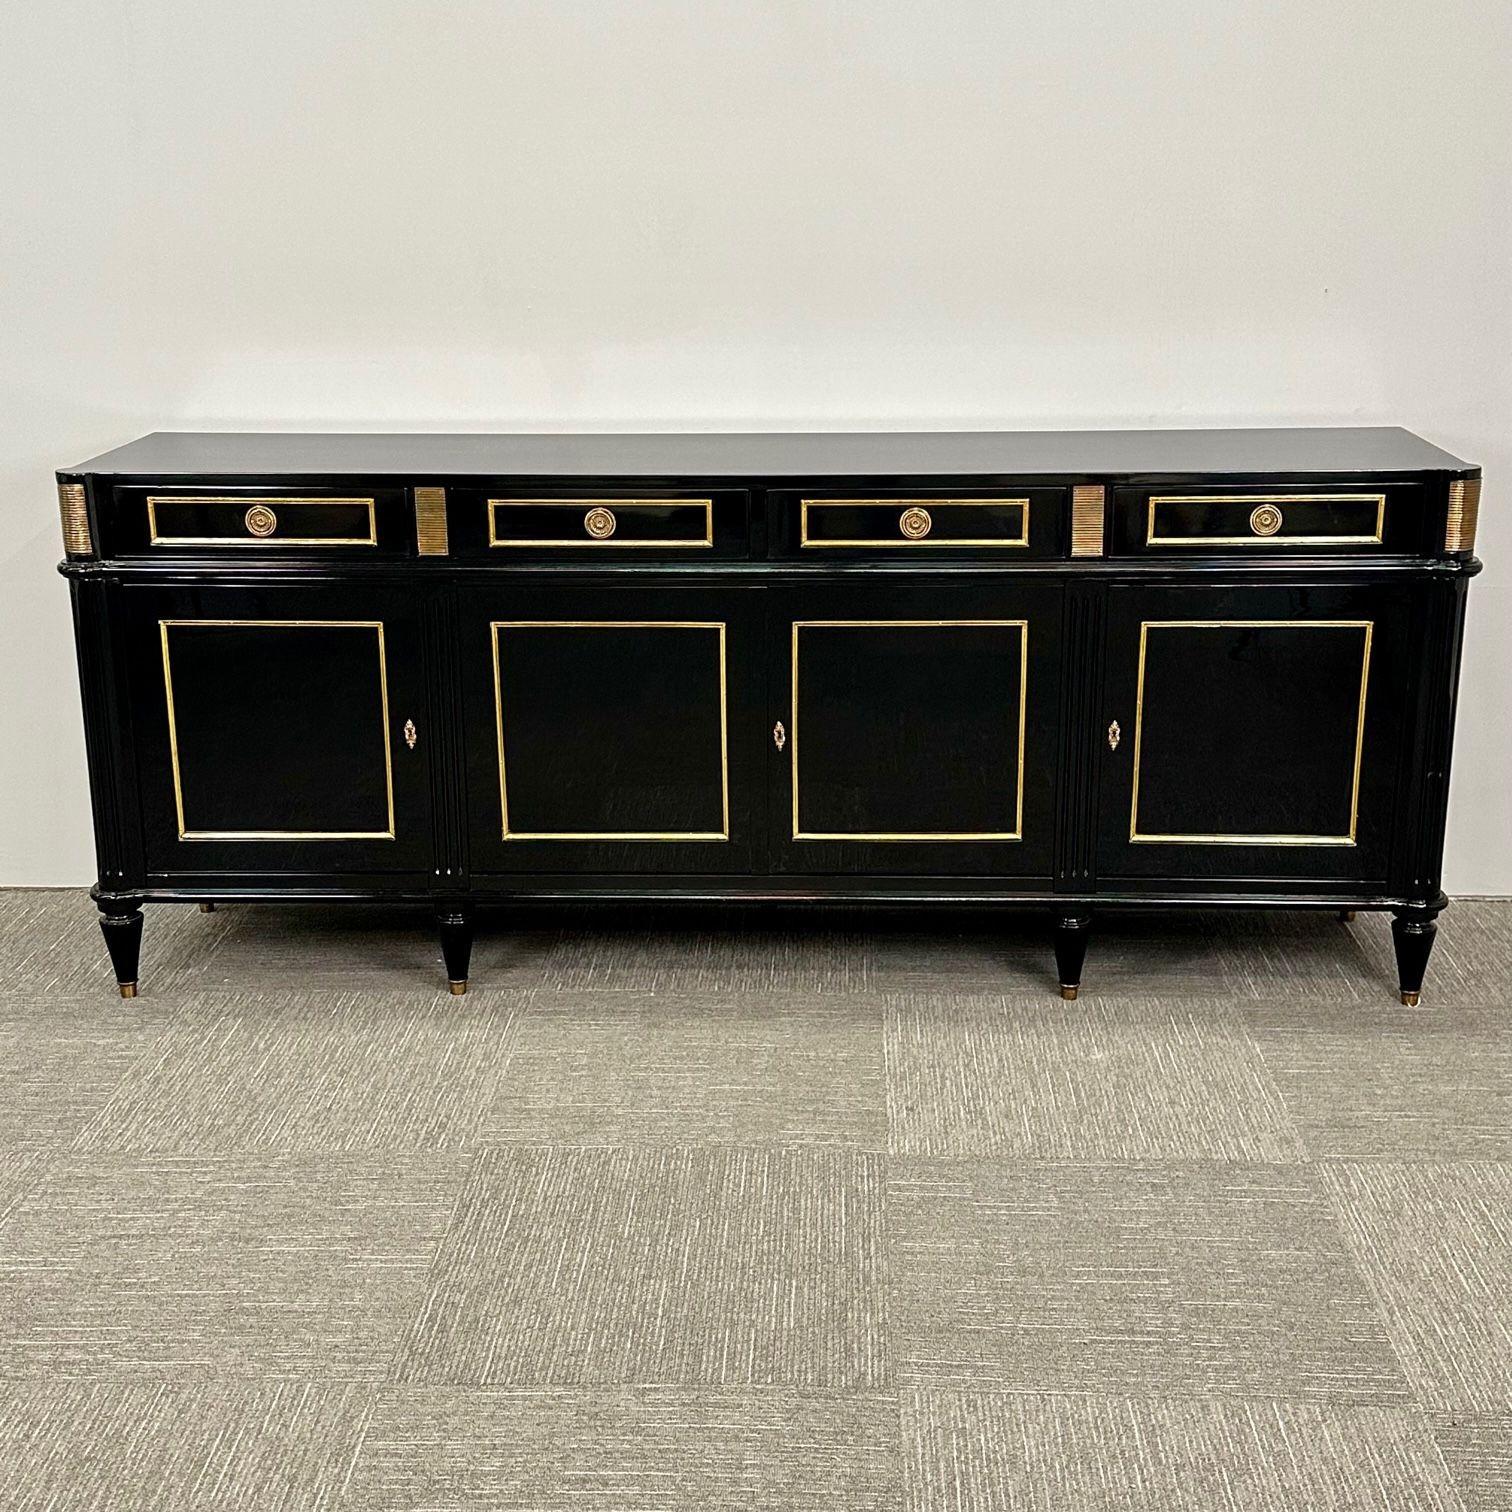 Mid-20th Century Hollywood Regency Style Black Lacquer Sideboard, Credenza , Maison Jansen Style For Sale